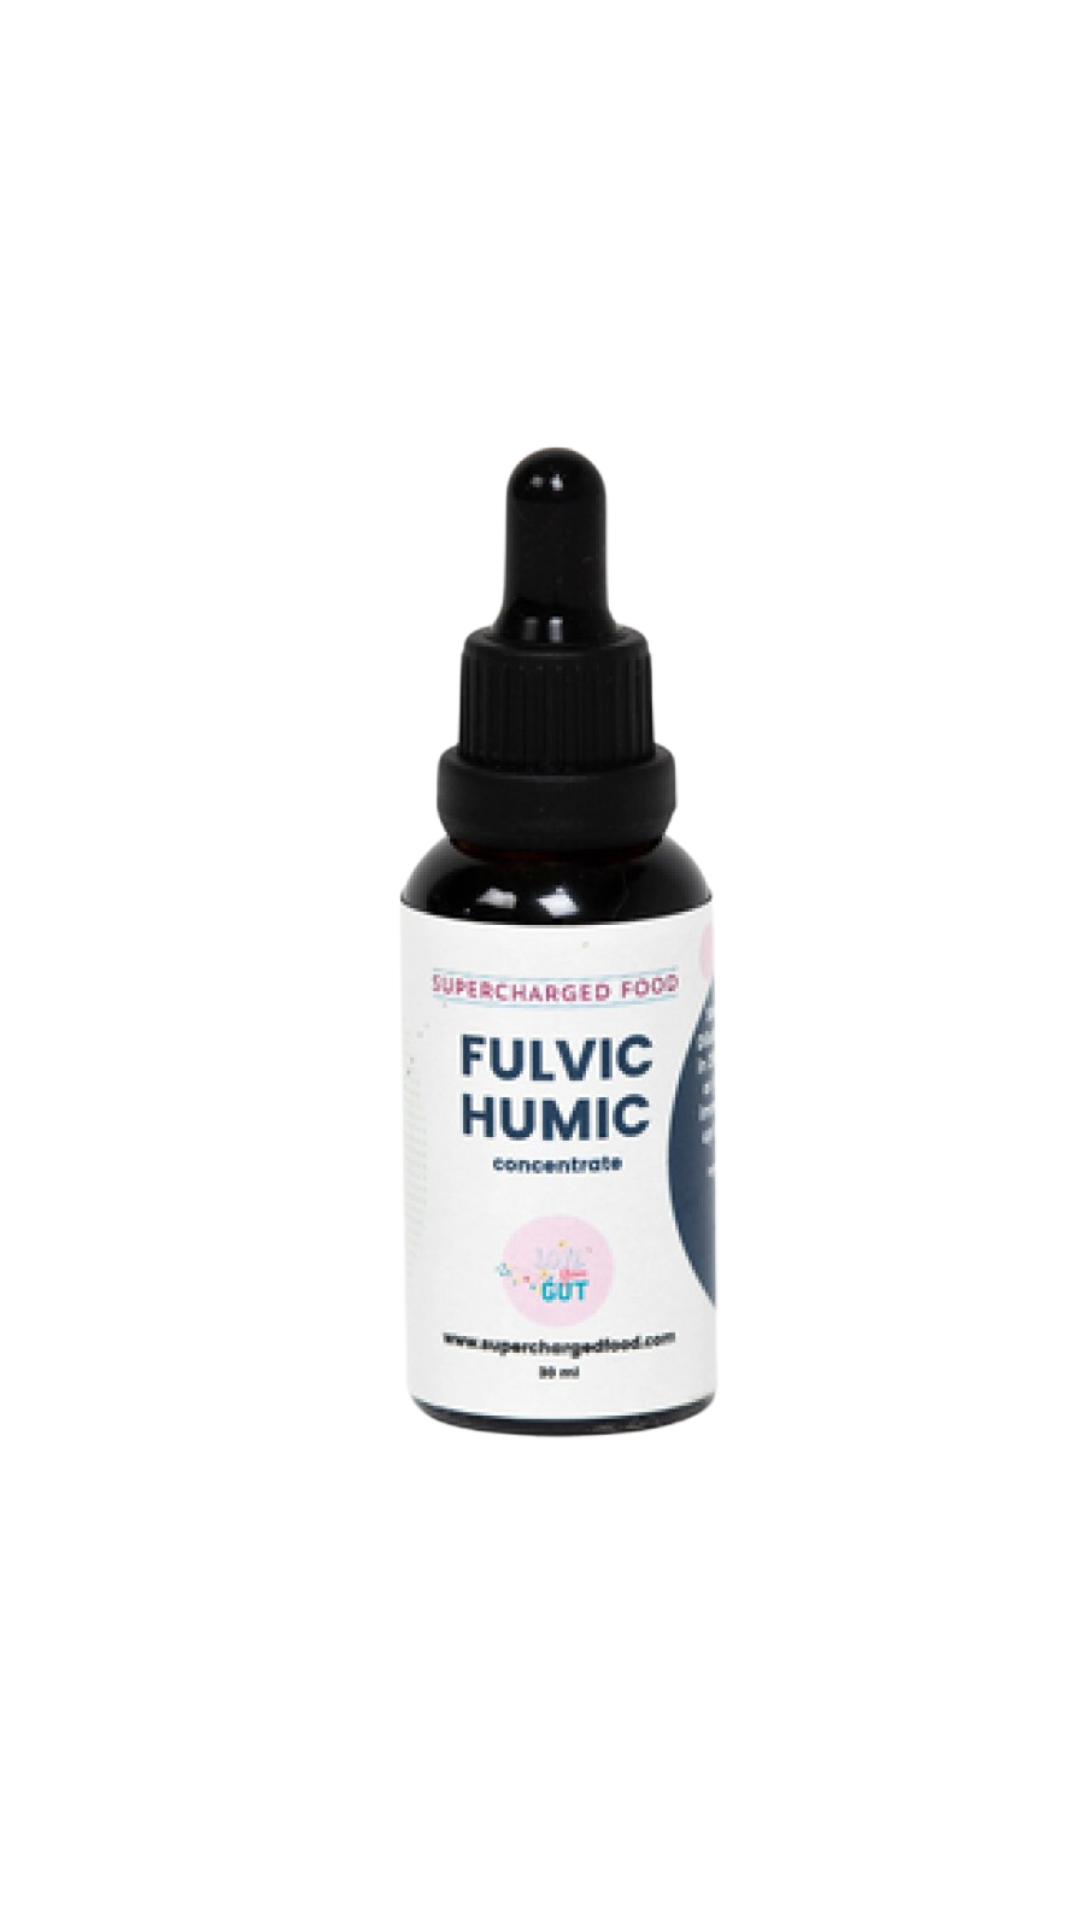 Fulvic Humic Concentrate